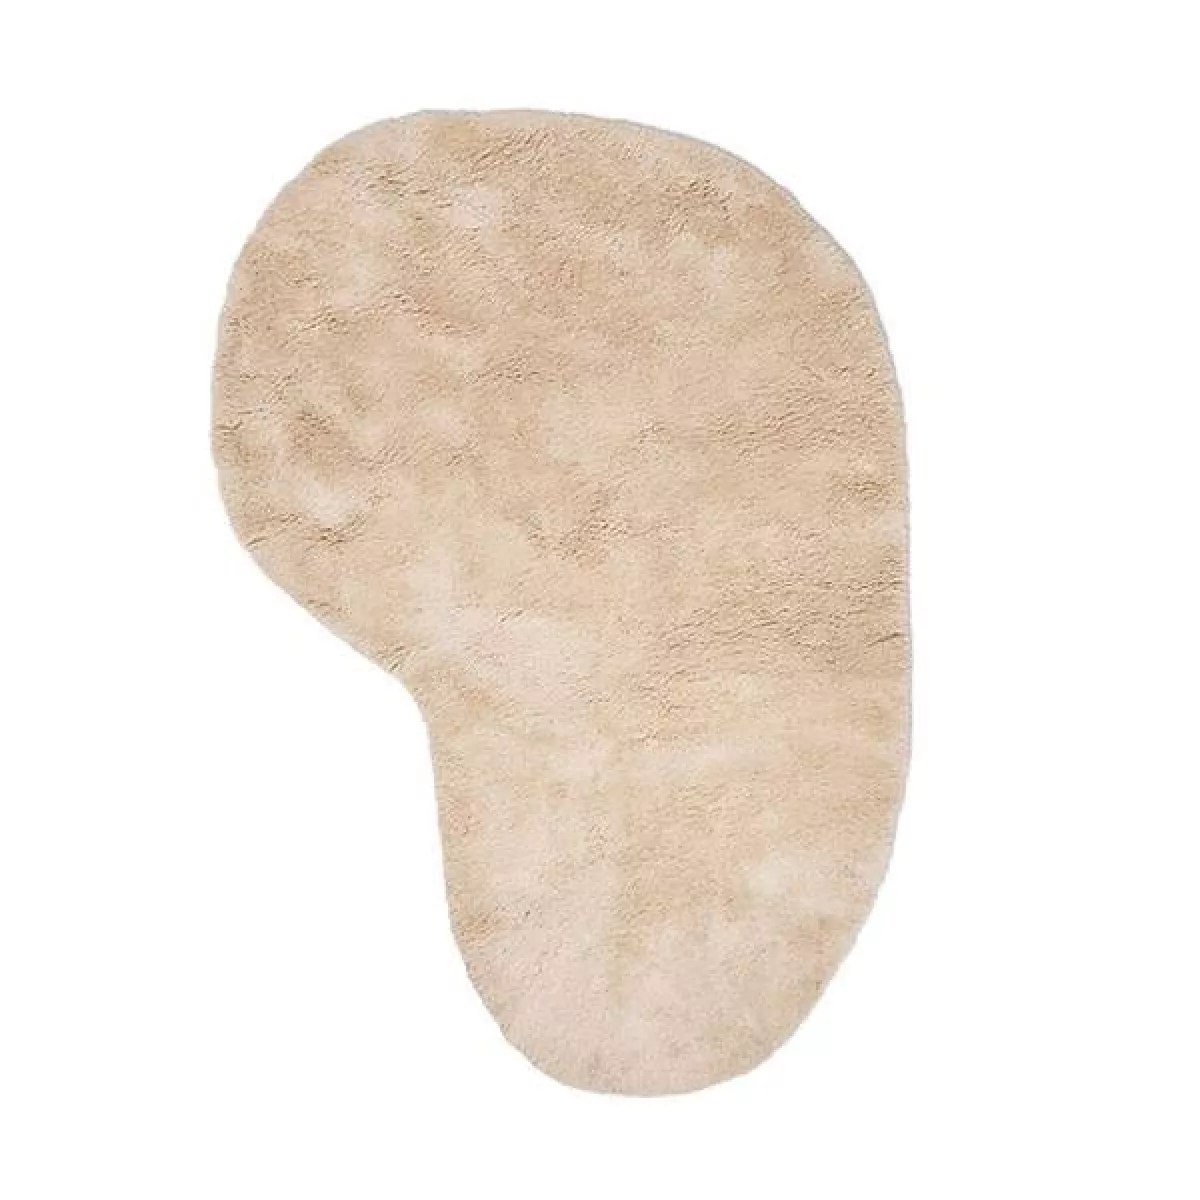 #2 - Ferm Living Forma Wool Rug - Off white